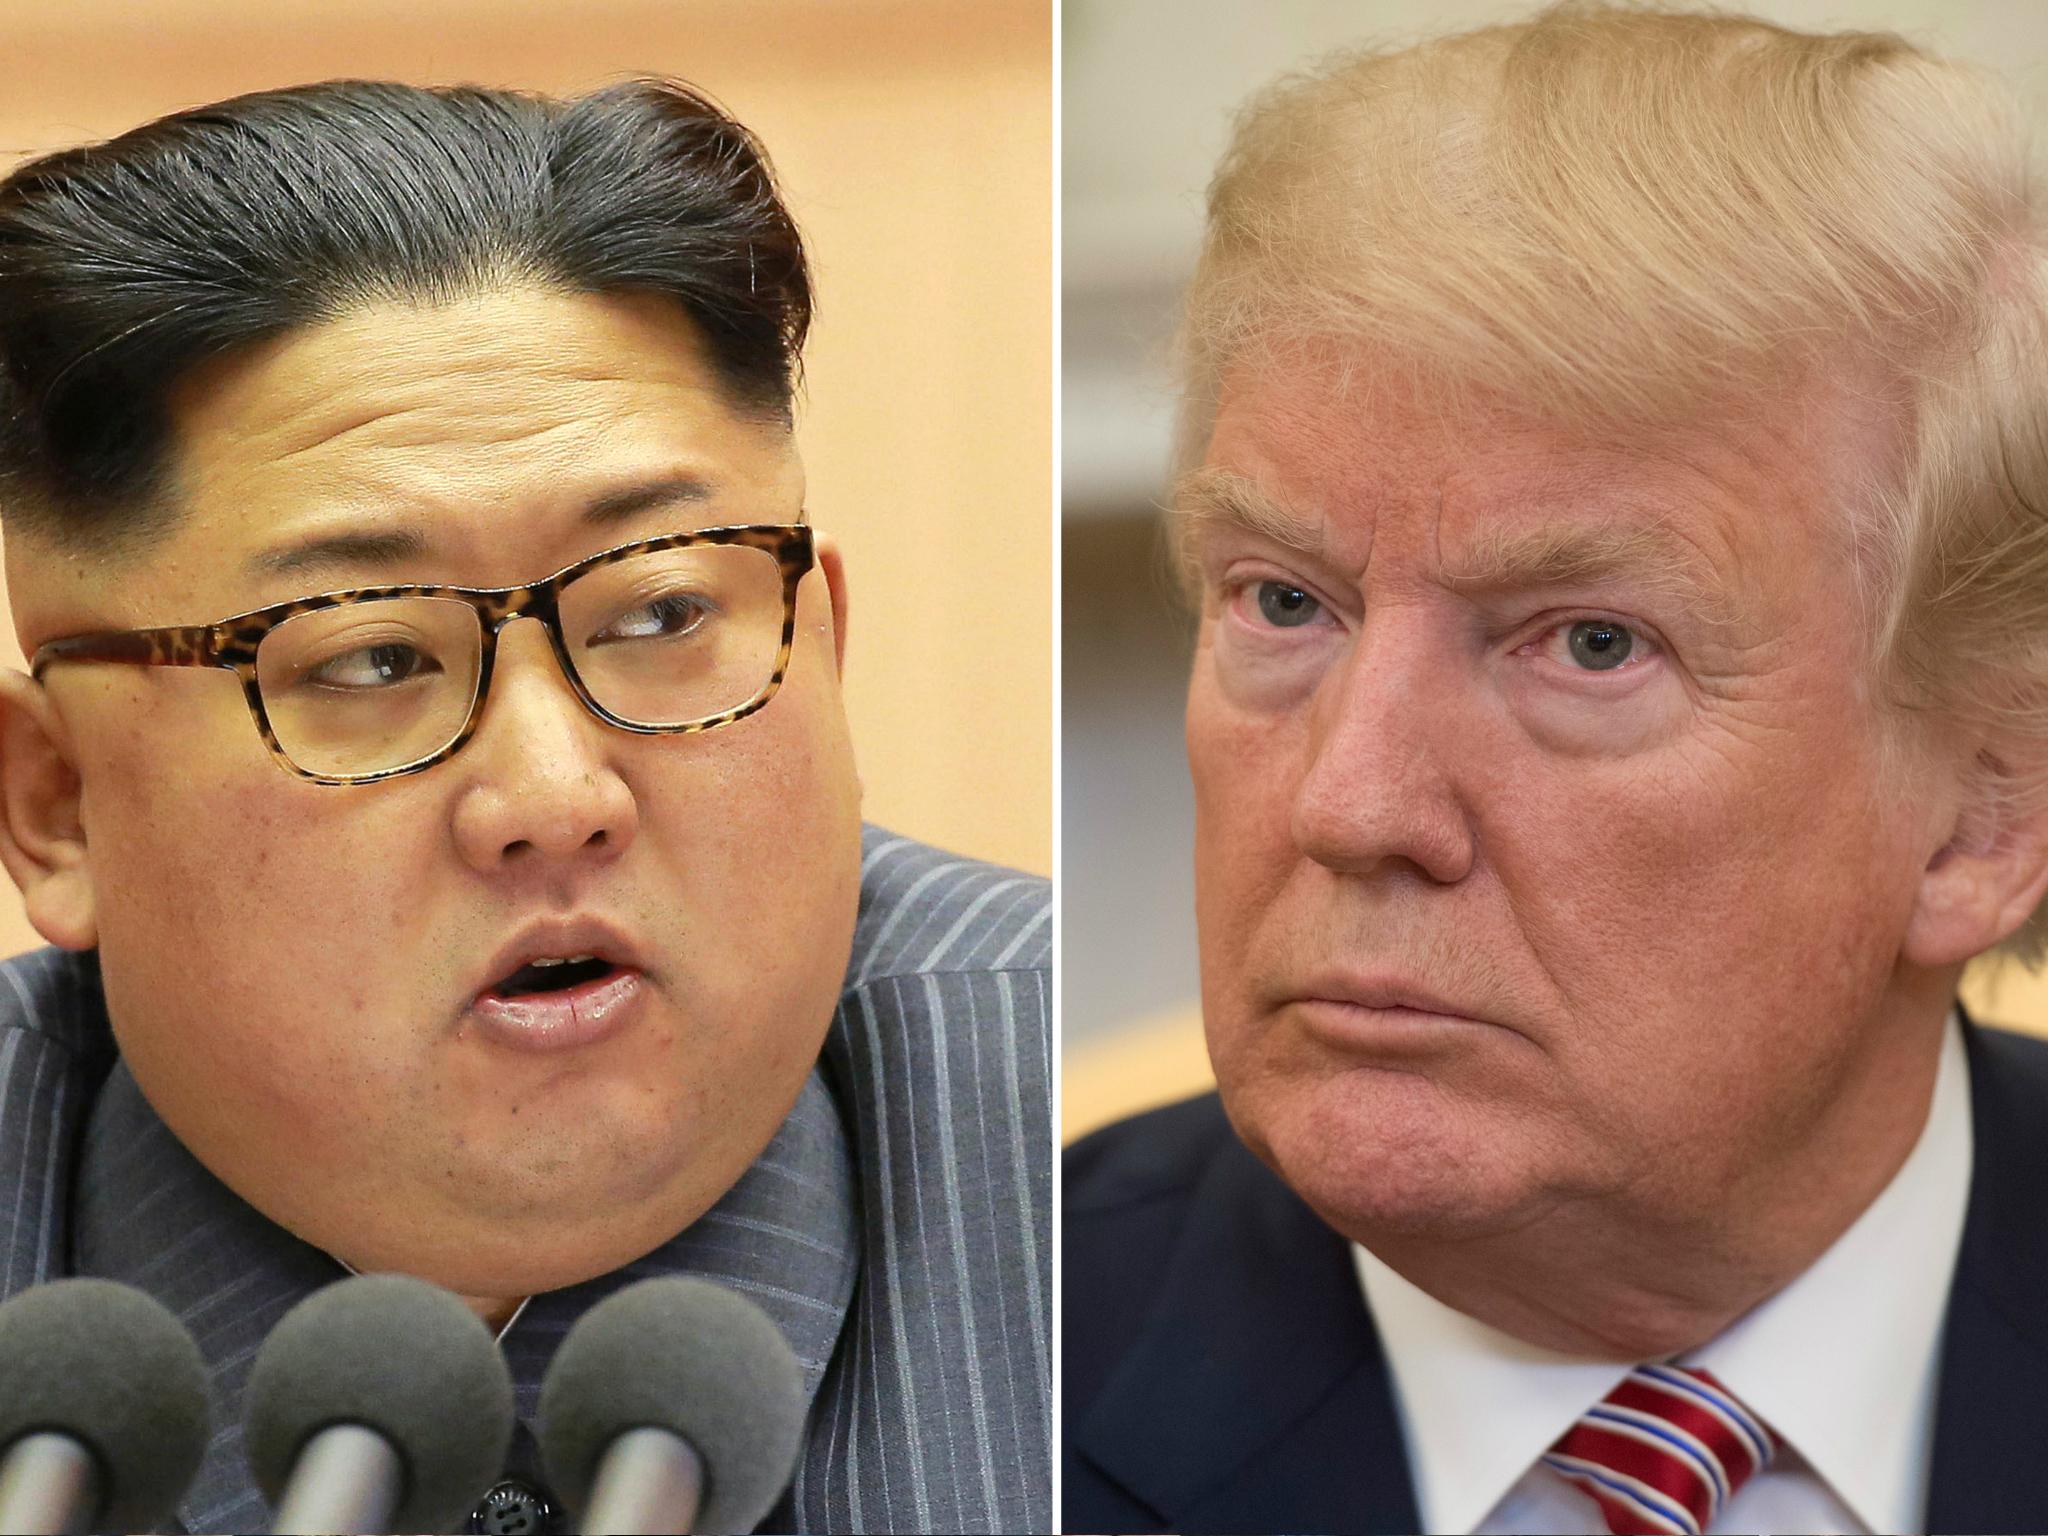 Mr Trump has had a long history of dissing Mr Kim and his country